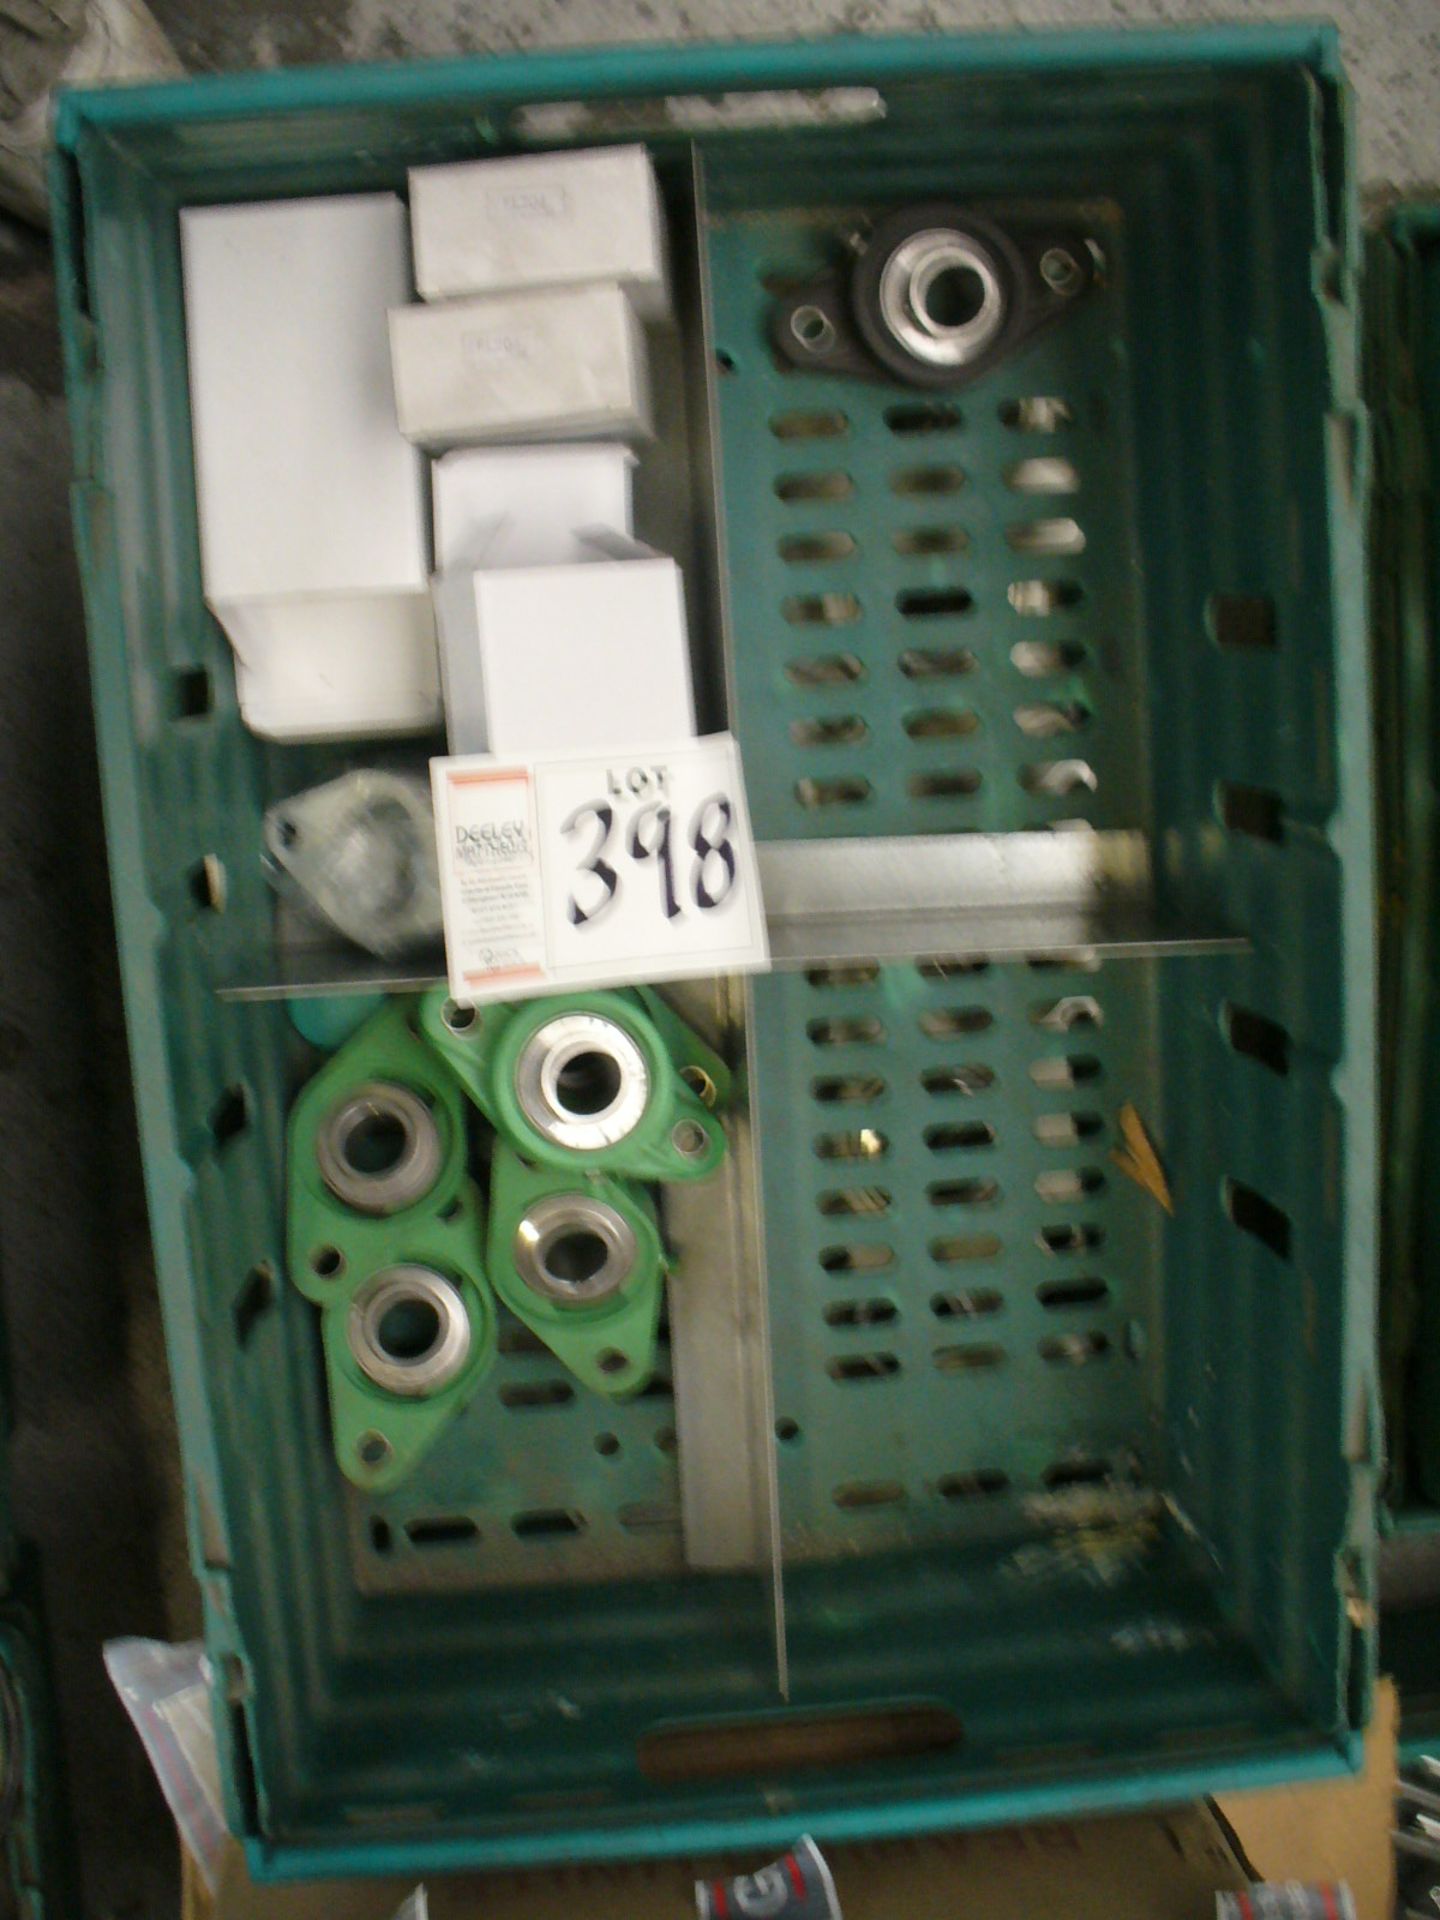 2 BINS and 2 BOXES - Quantity approx 120 total, 2 hole bearing housings and 1 box of 4 hole